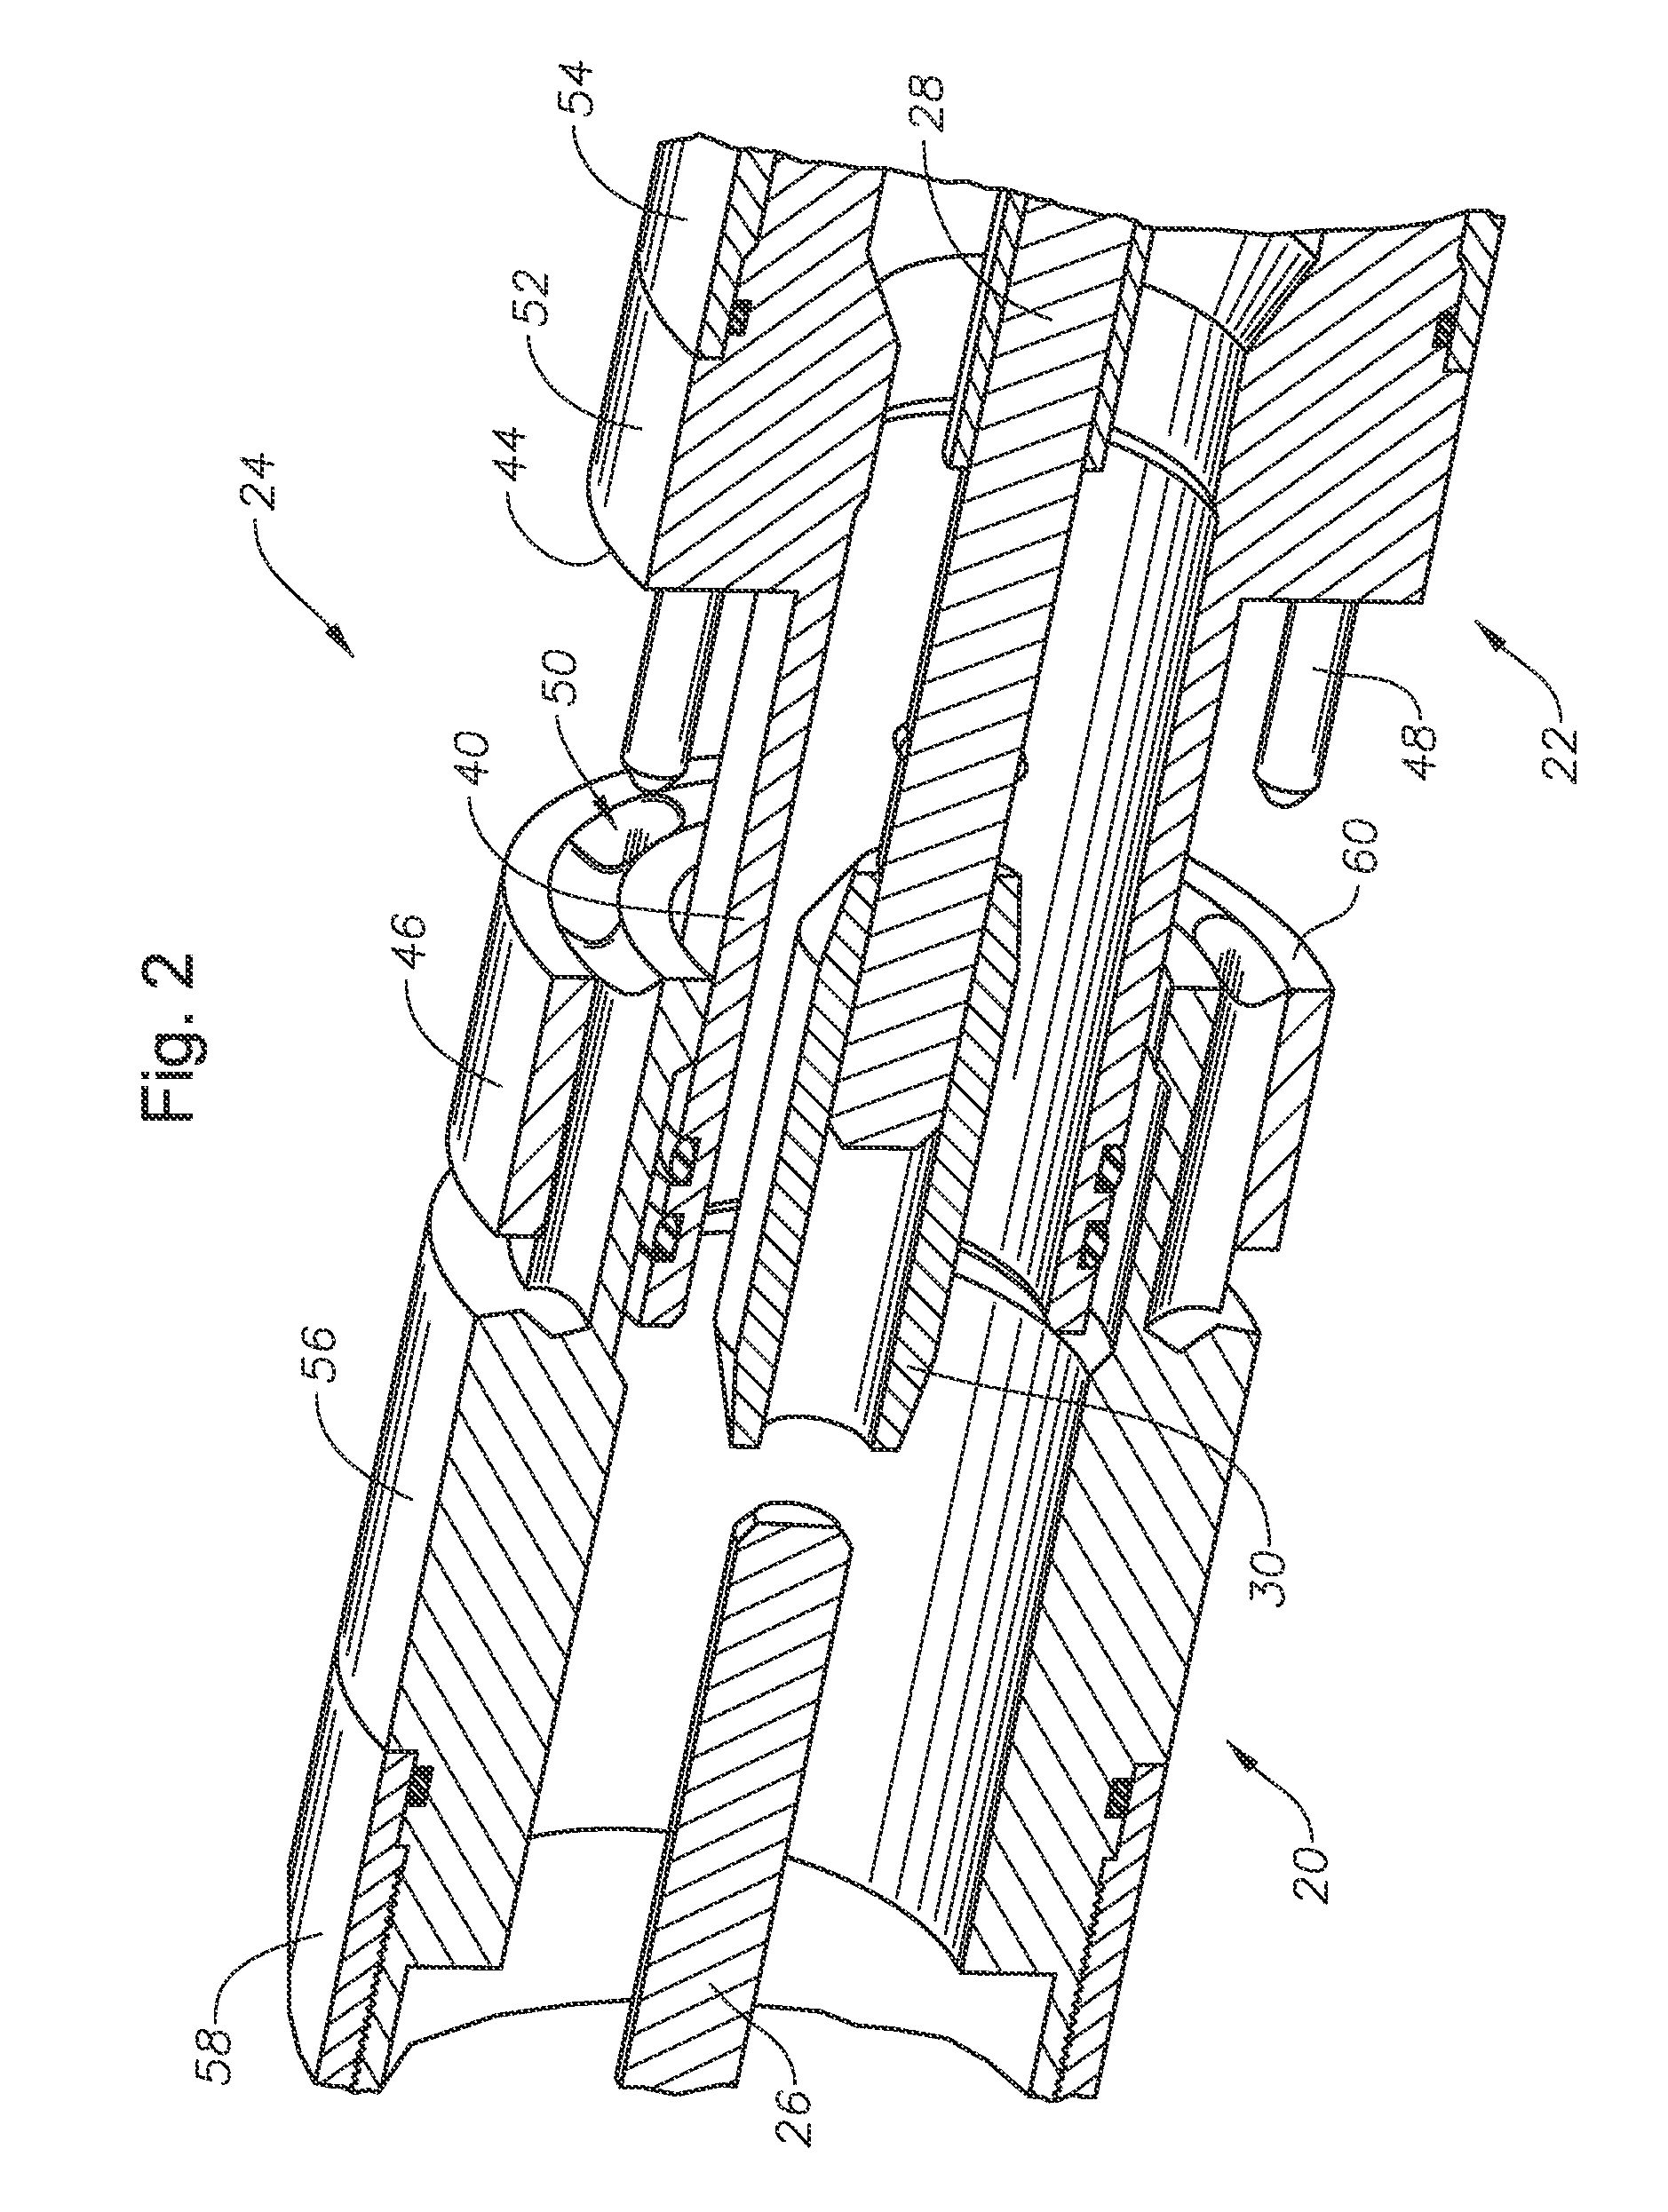 Connection assembly for through tubing conveyed submersible pumps